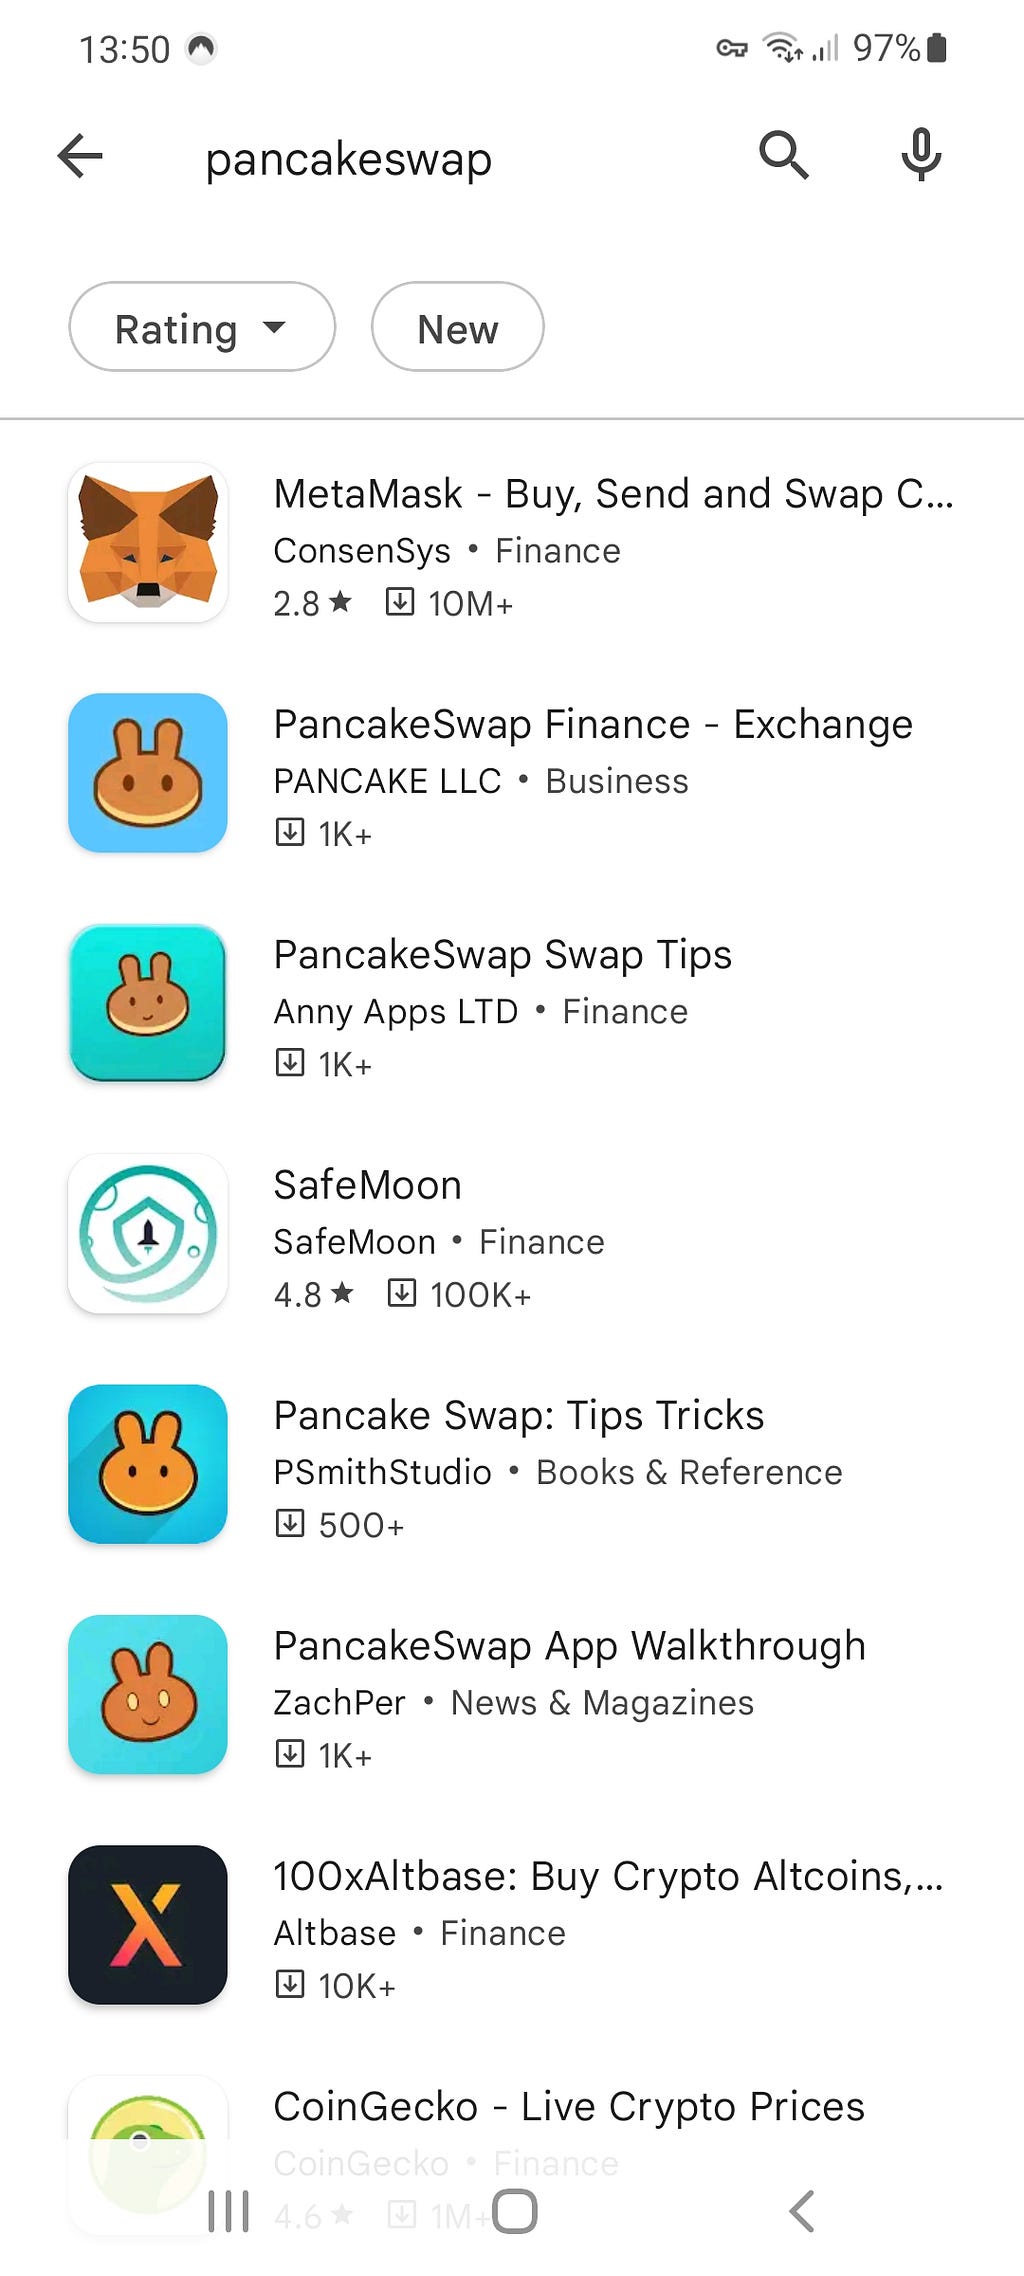 Fake pancakeswap phissing application listed on Google Play Store